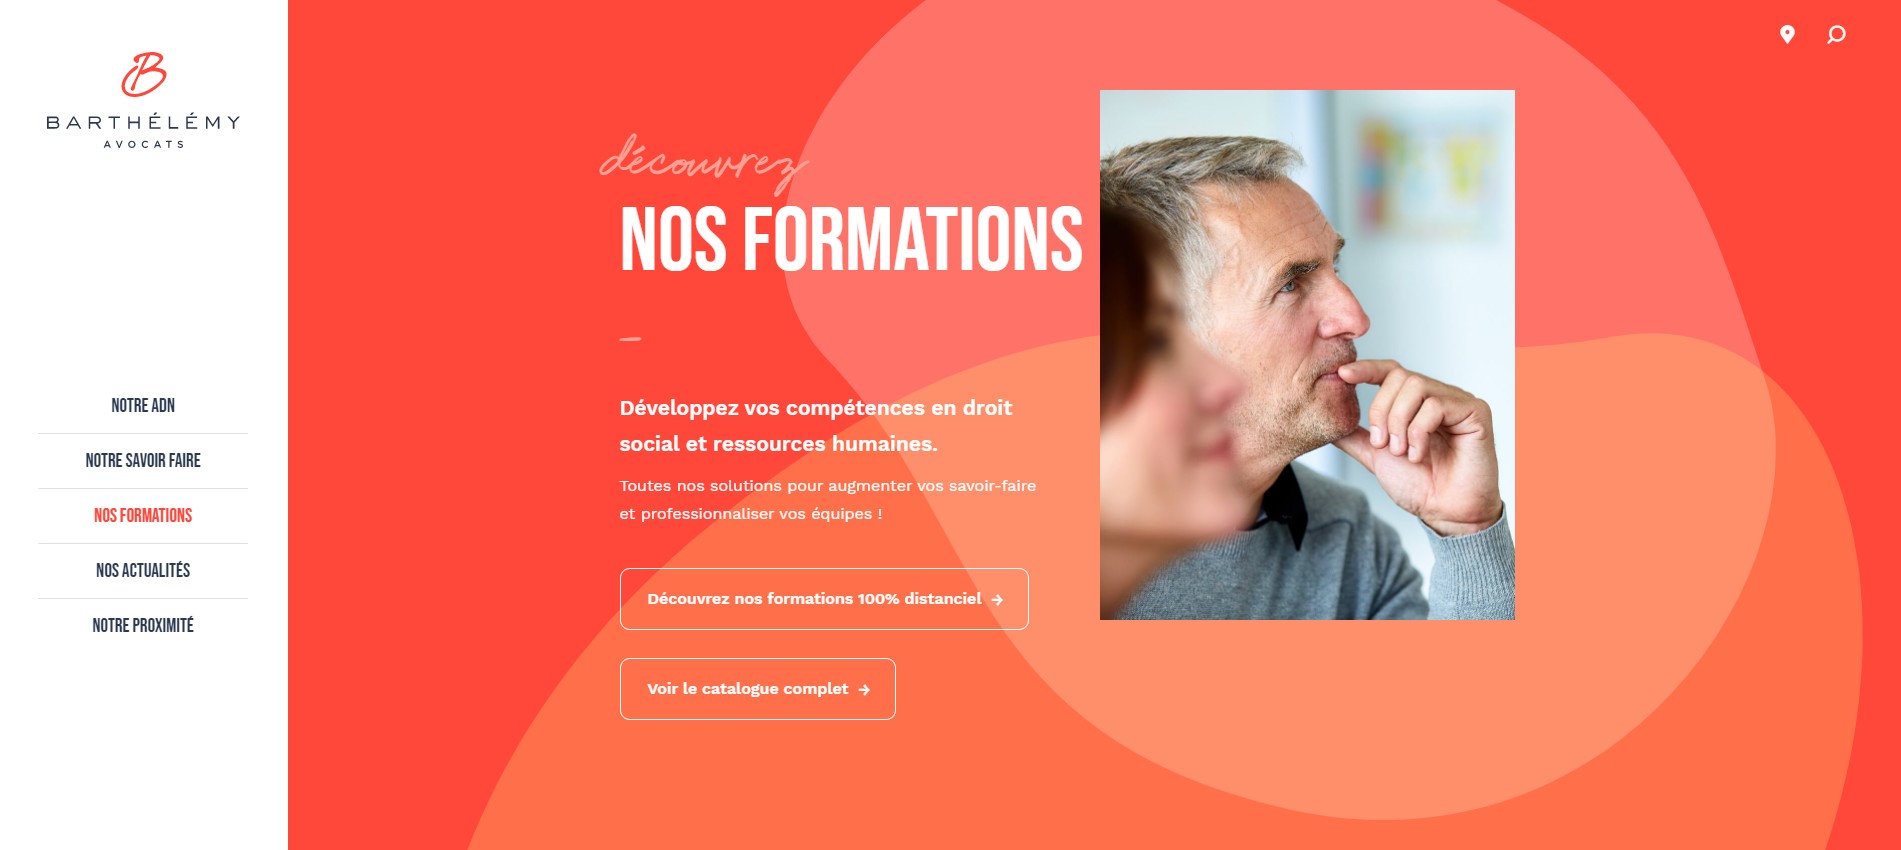 barthelemy avocats site formation